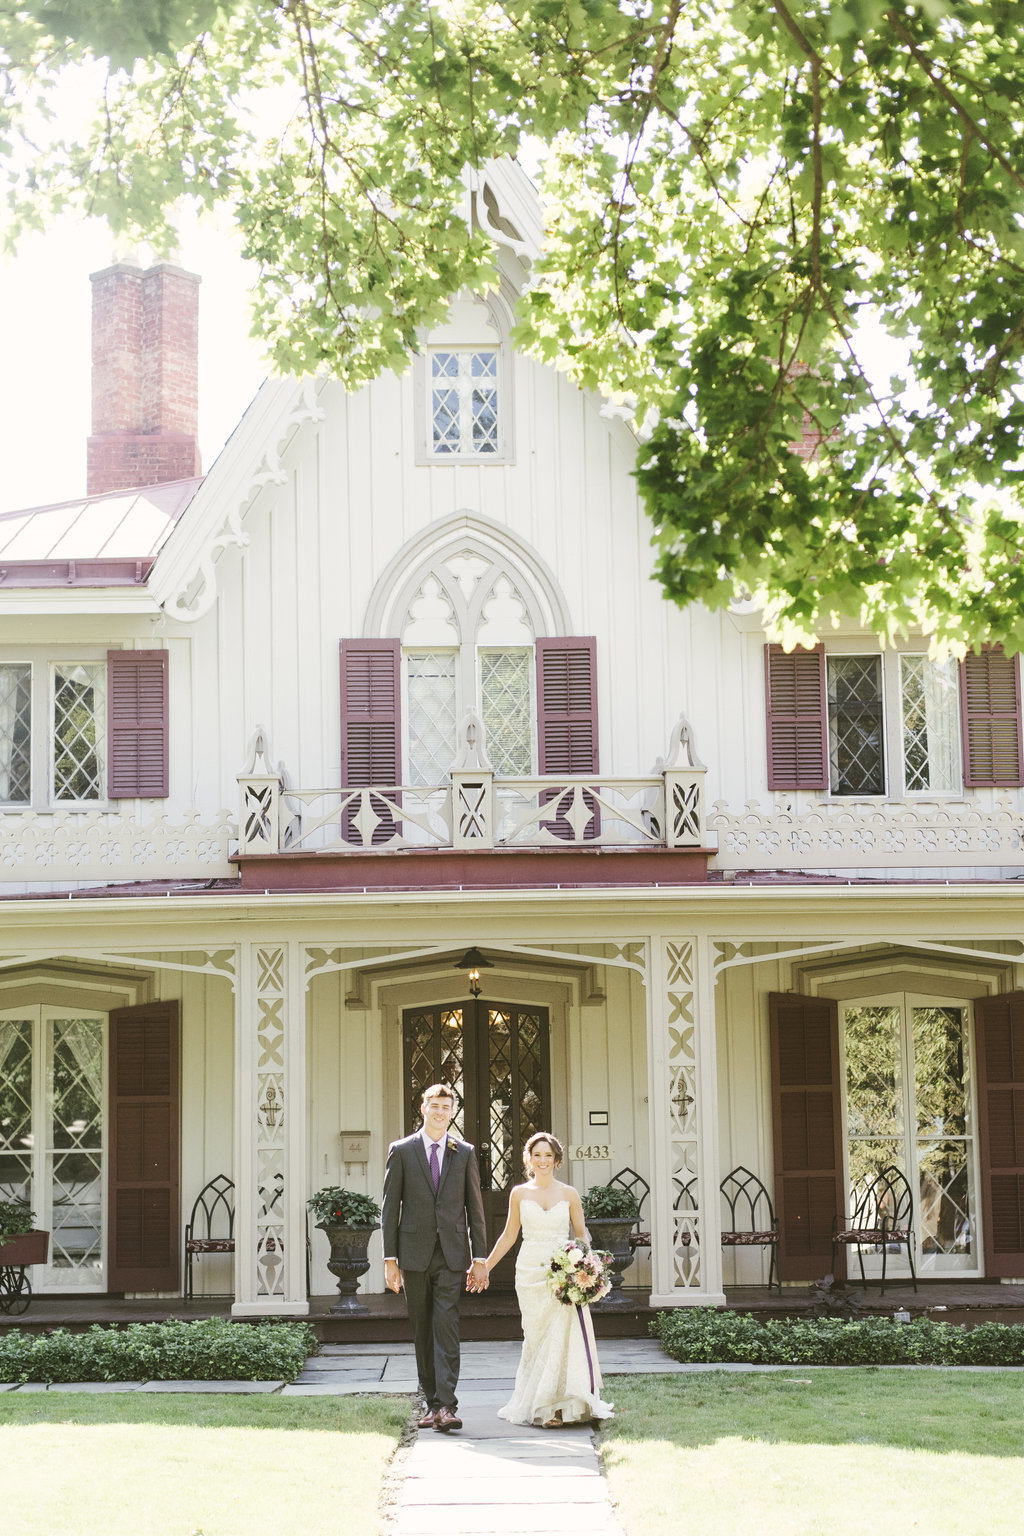 Monica-Relyea-Events-Alicia-King-Photography-Delamater-Inn-Beekman-Arms-Wedding-Rhinebeck-New-York-Hudson-Valley119